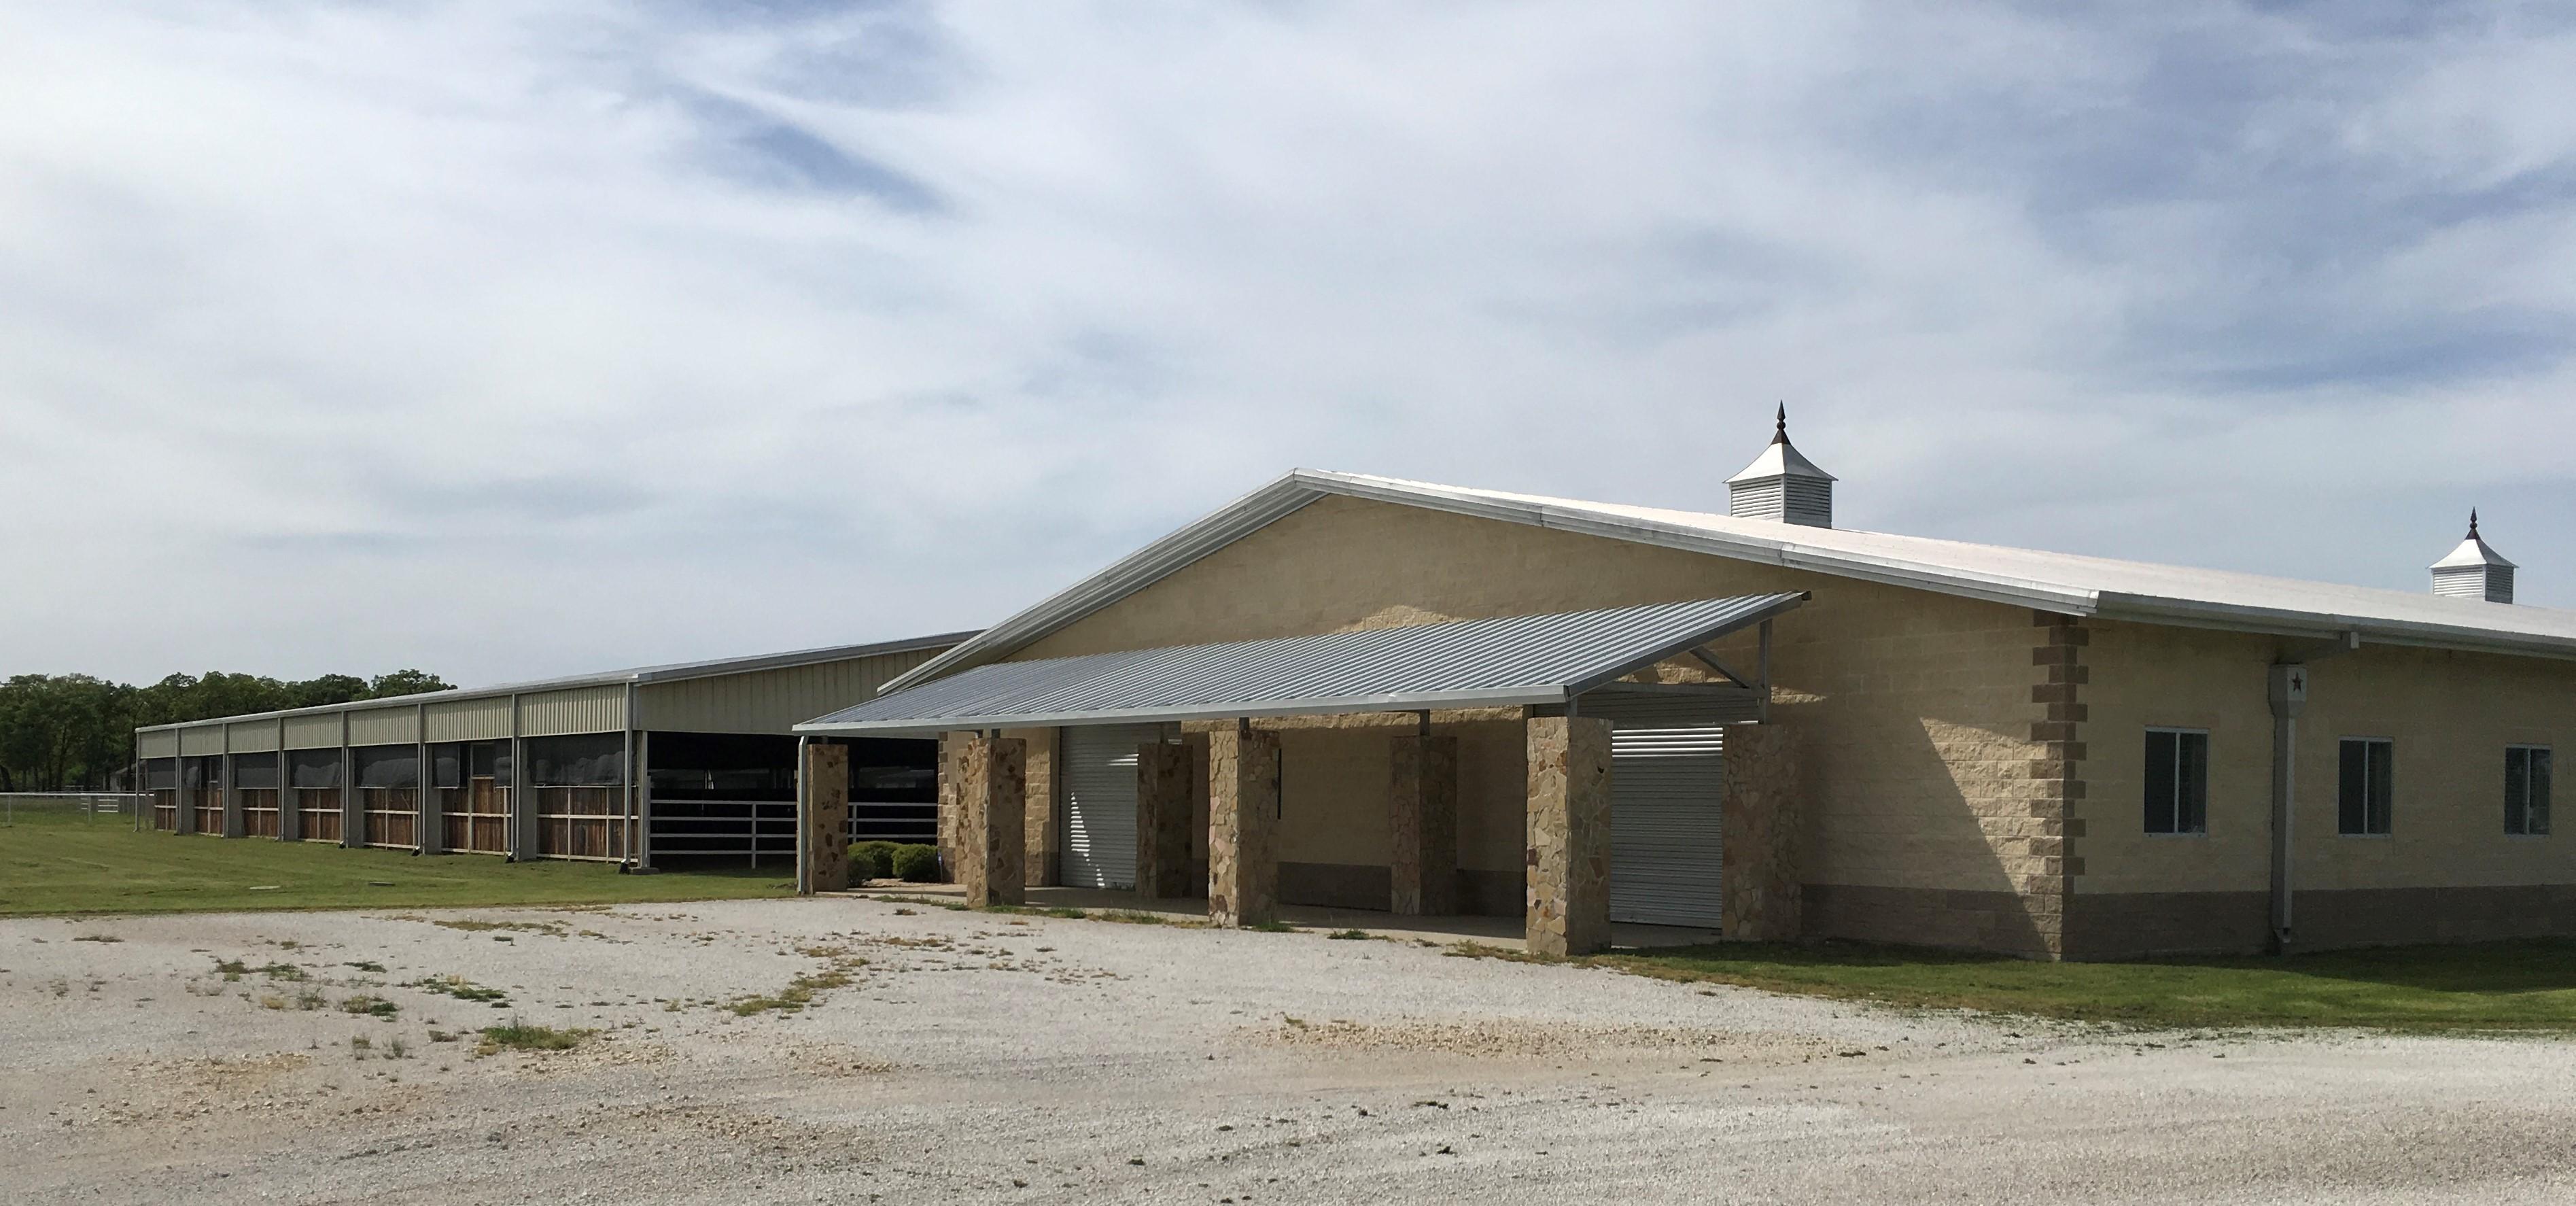 Tract 1: Custom Show Barn and Covered Arena on 9.7 acres